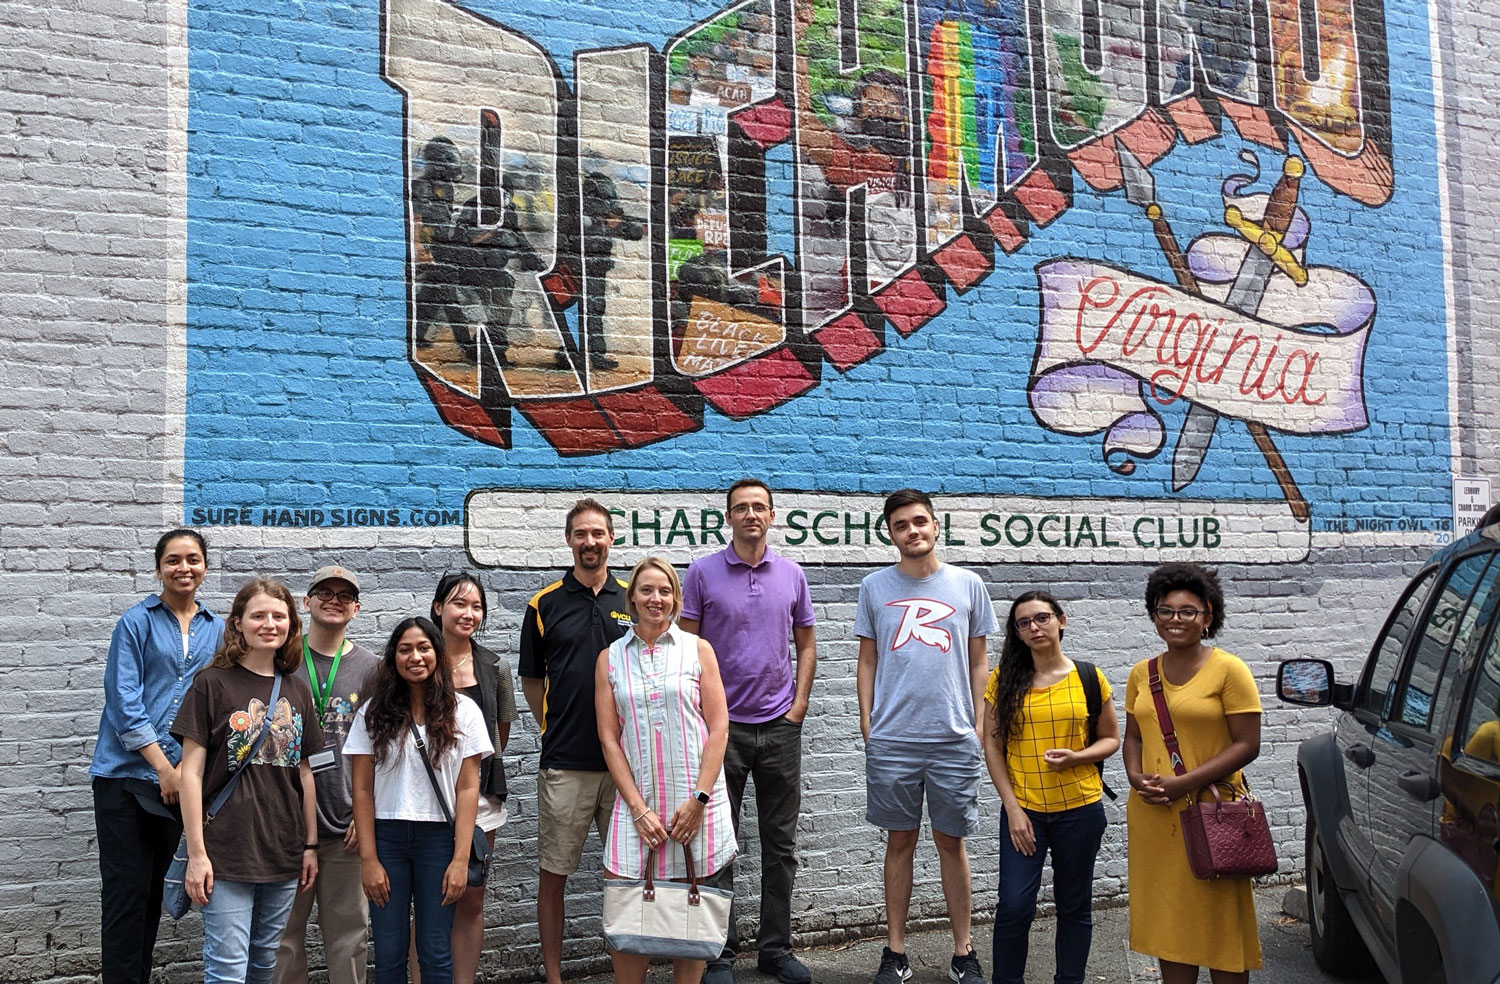 Summer REU students standing in front of a mural outside Charm School Social Club